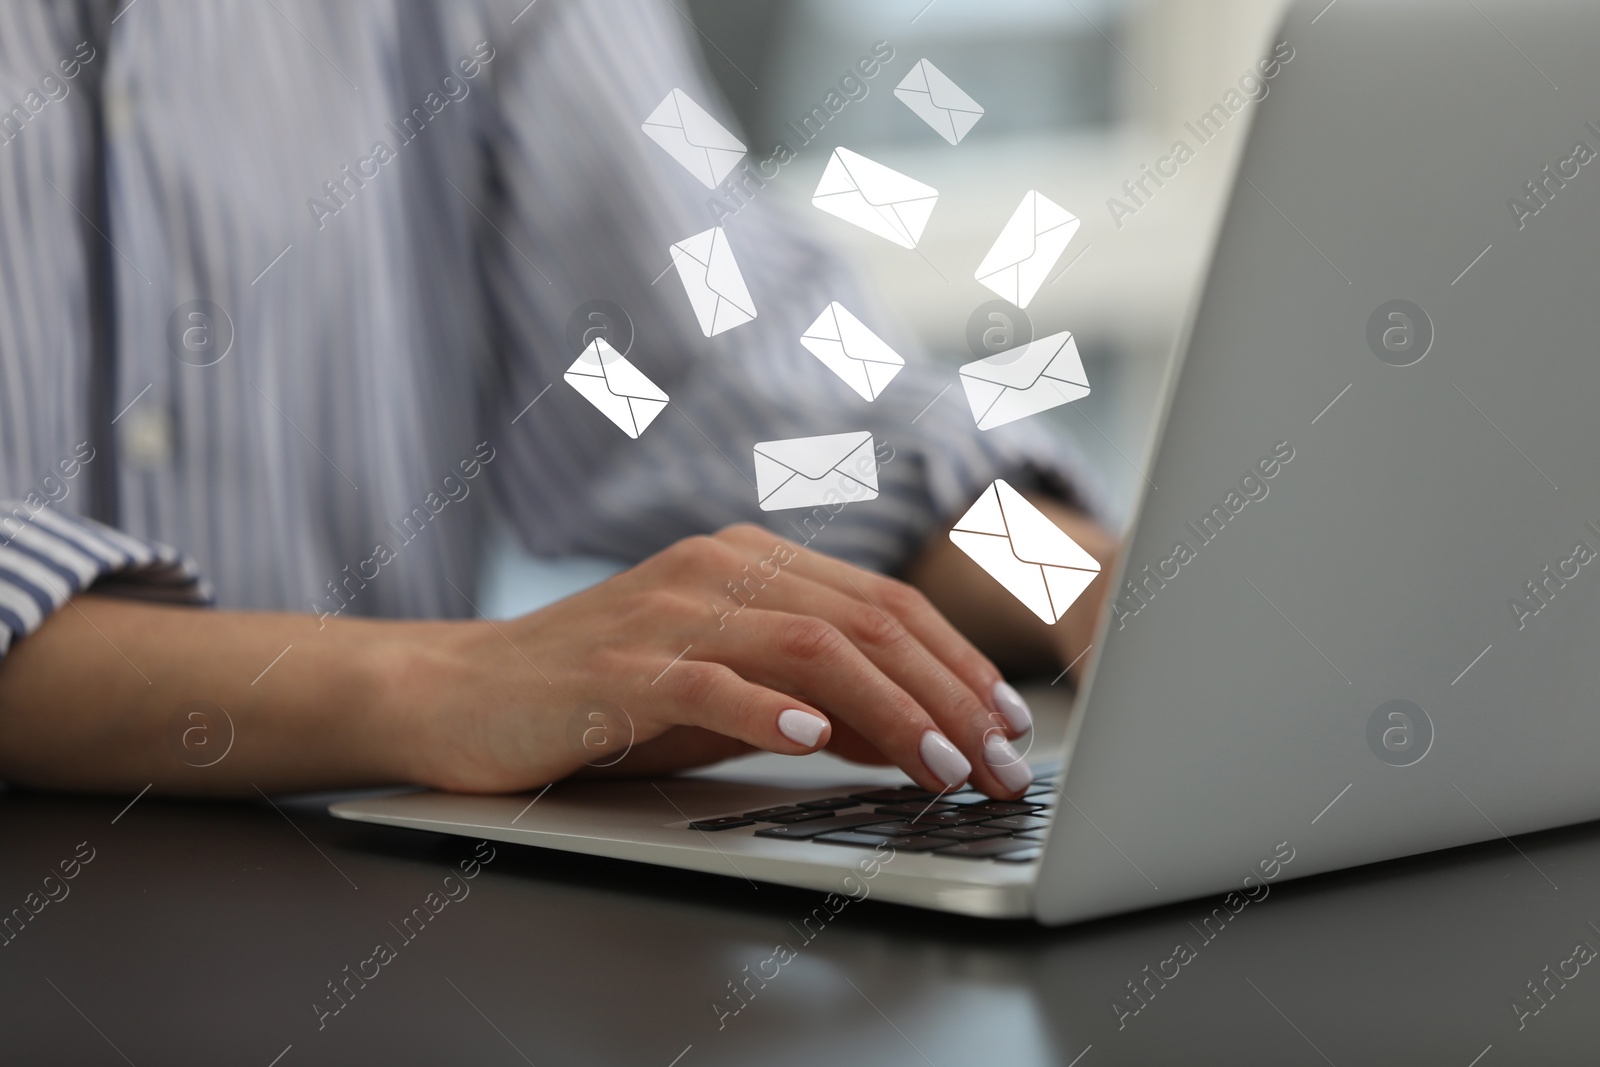 Image of Email. Woman using laptop at table, closeup. Letter illustrations over device